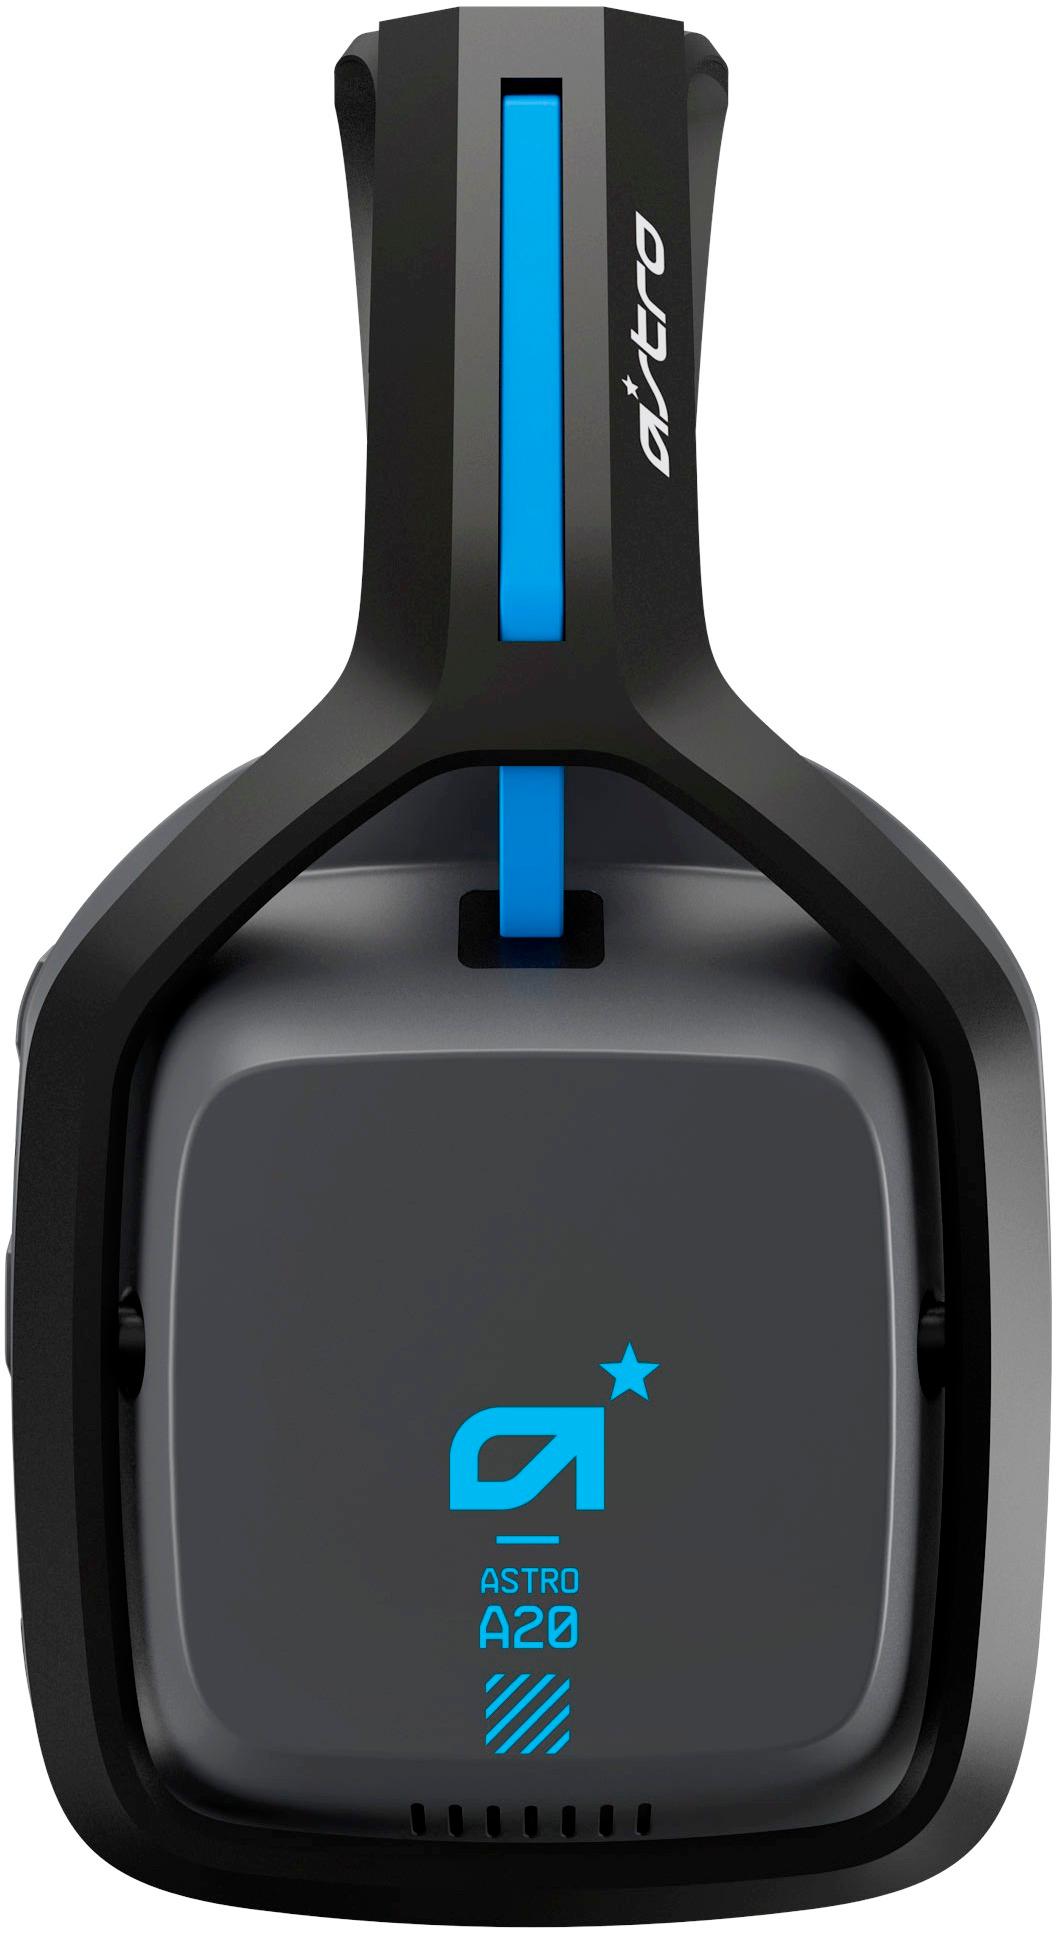 Astro A20 (Call of Duty Edition) Wireless Gaming Headset Review - GameSpot